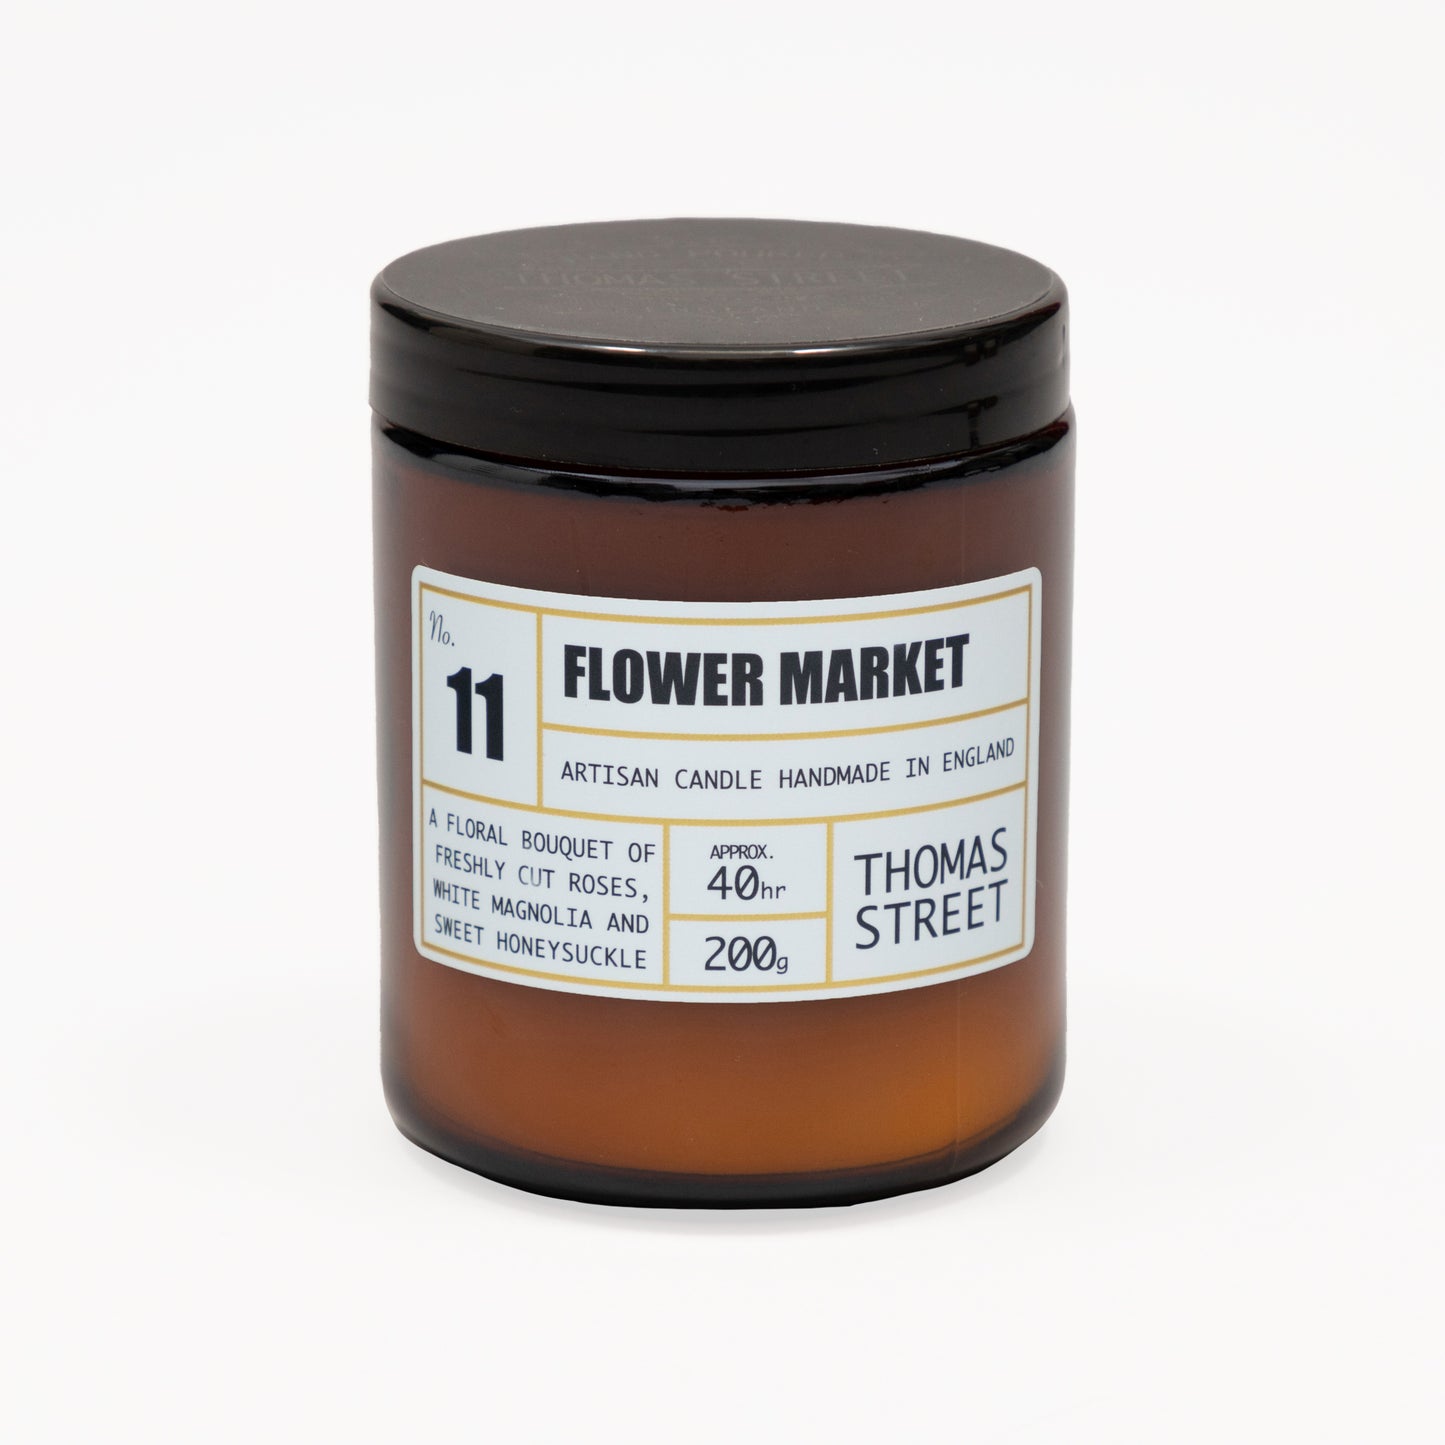 THOMAS STREET CANDLES #11 Flower Market Scented Candle (200g)